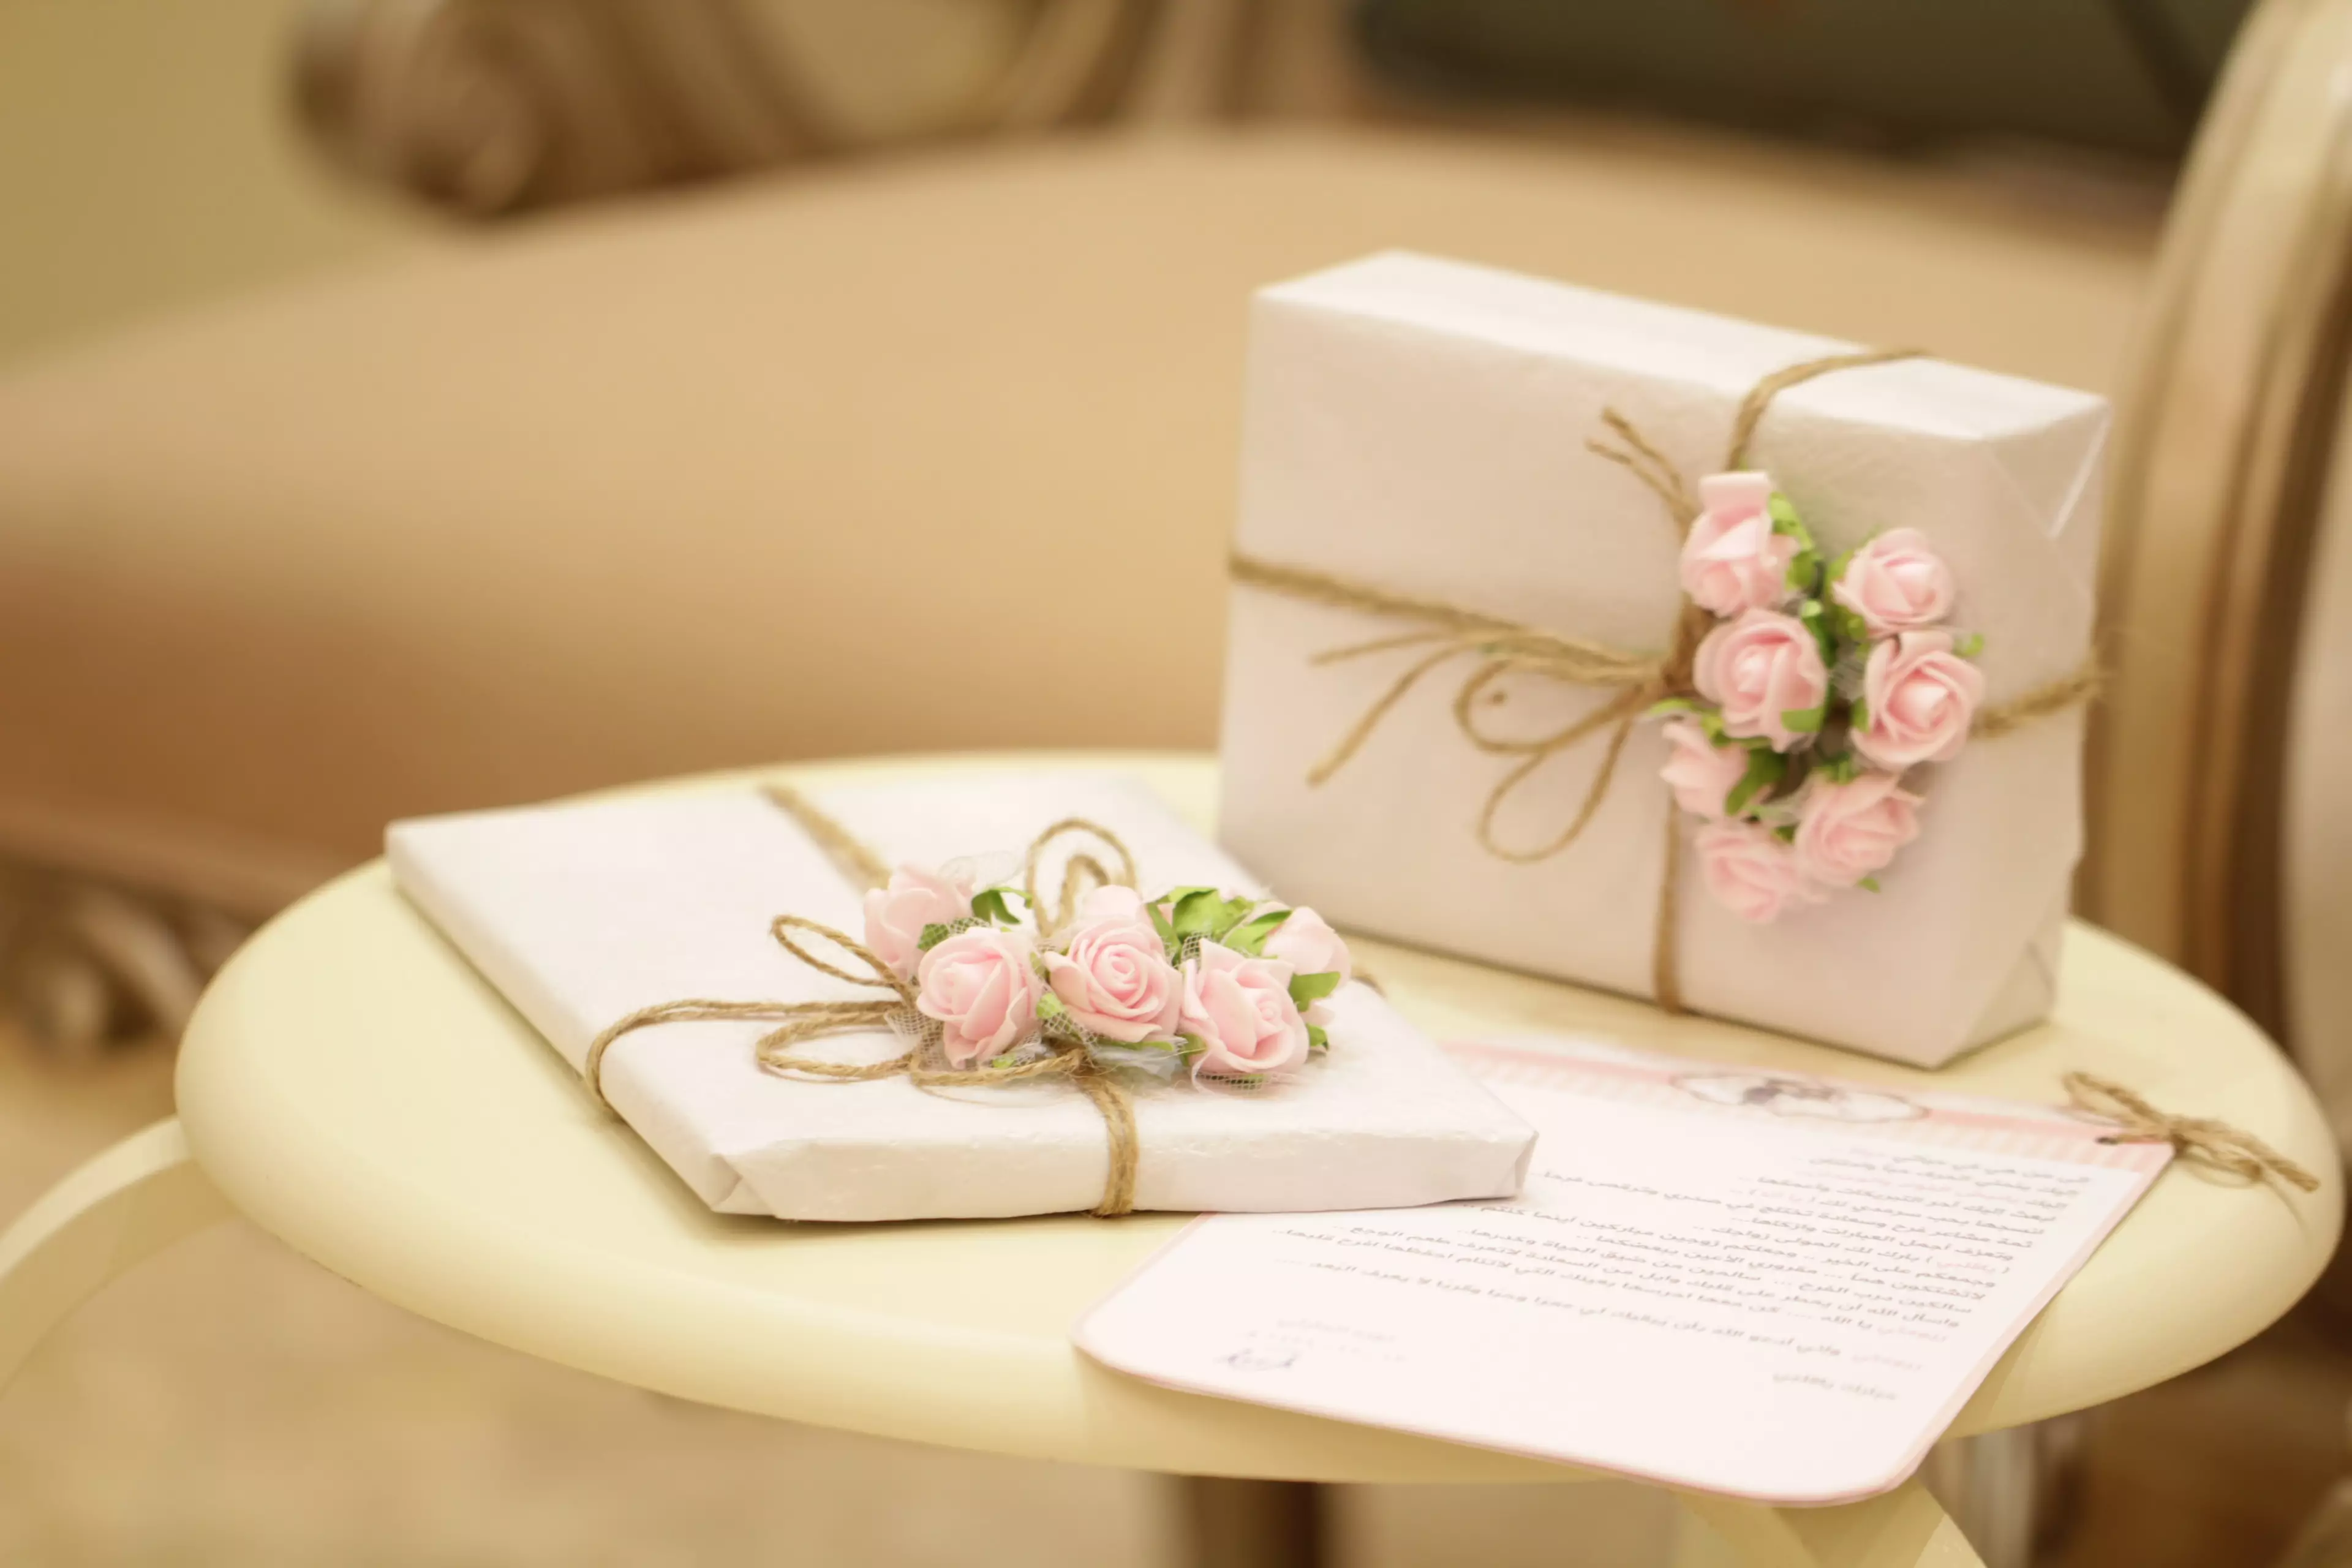 The comments were frustrated that the bride put such value in gift (